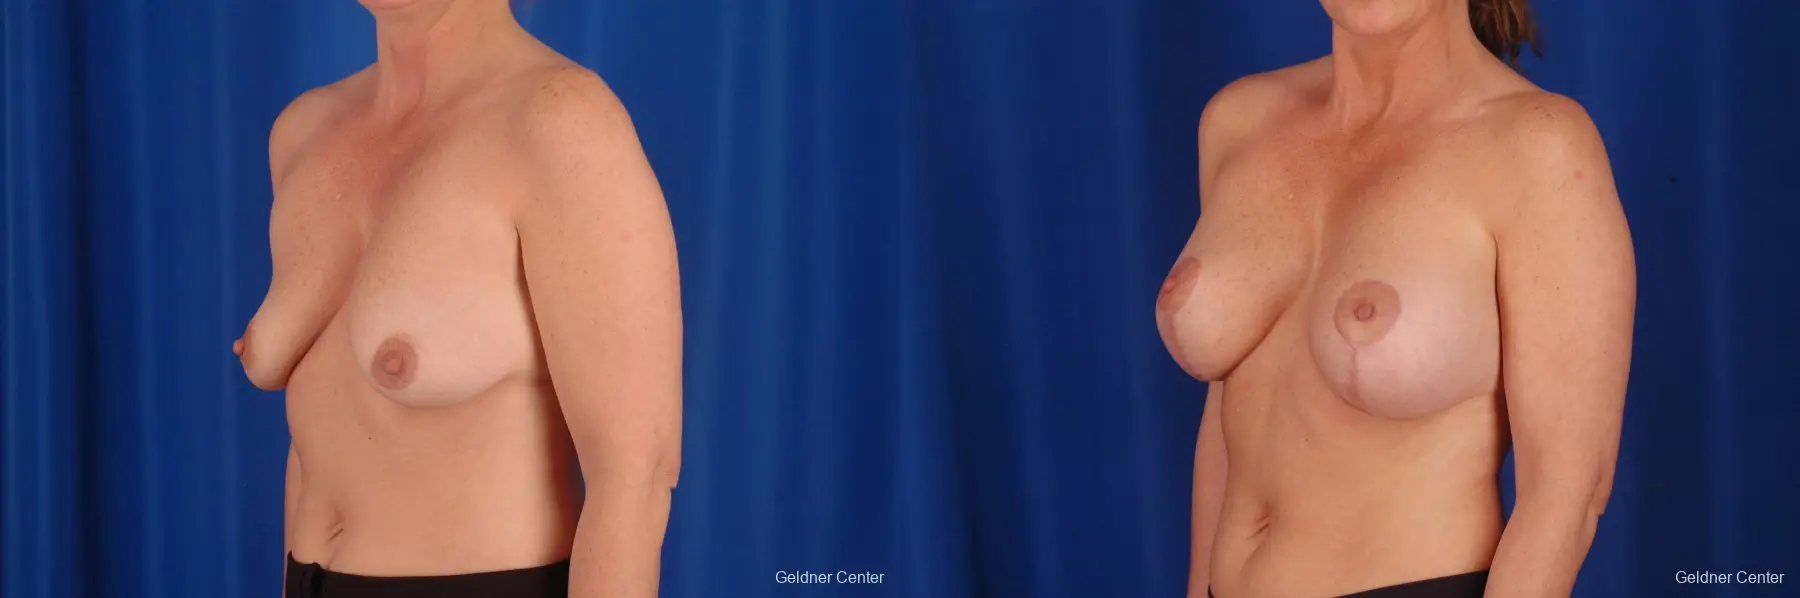 Breast Lift Lake Shore Dr, Chicago 2308 - Before and After 4